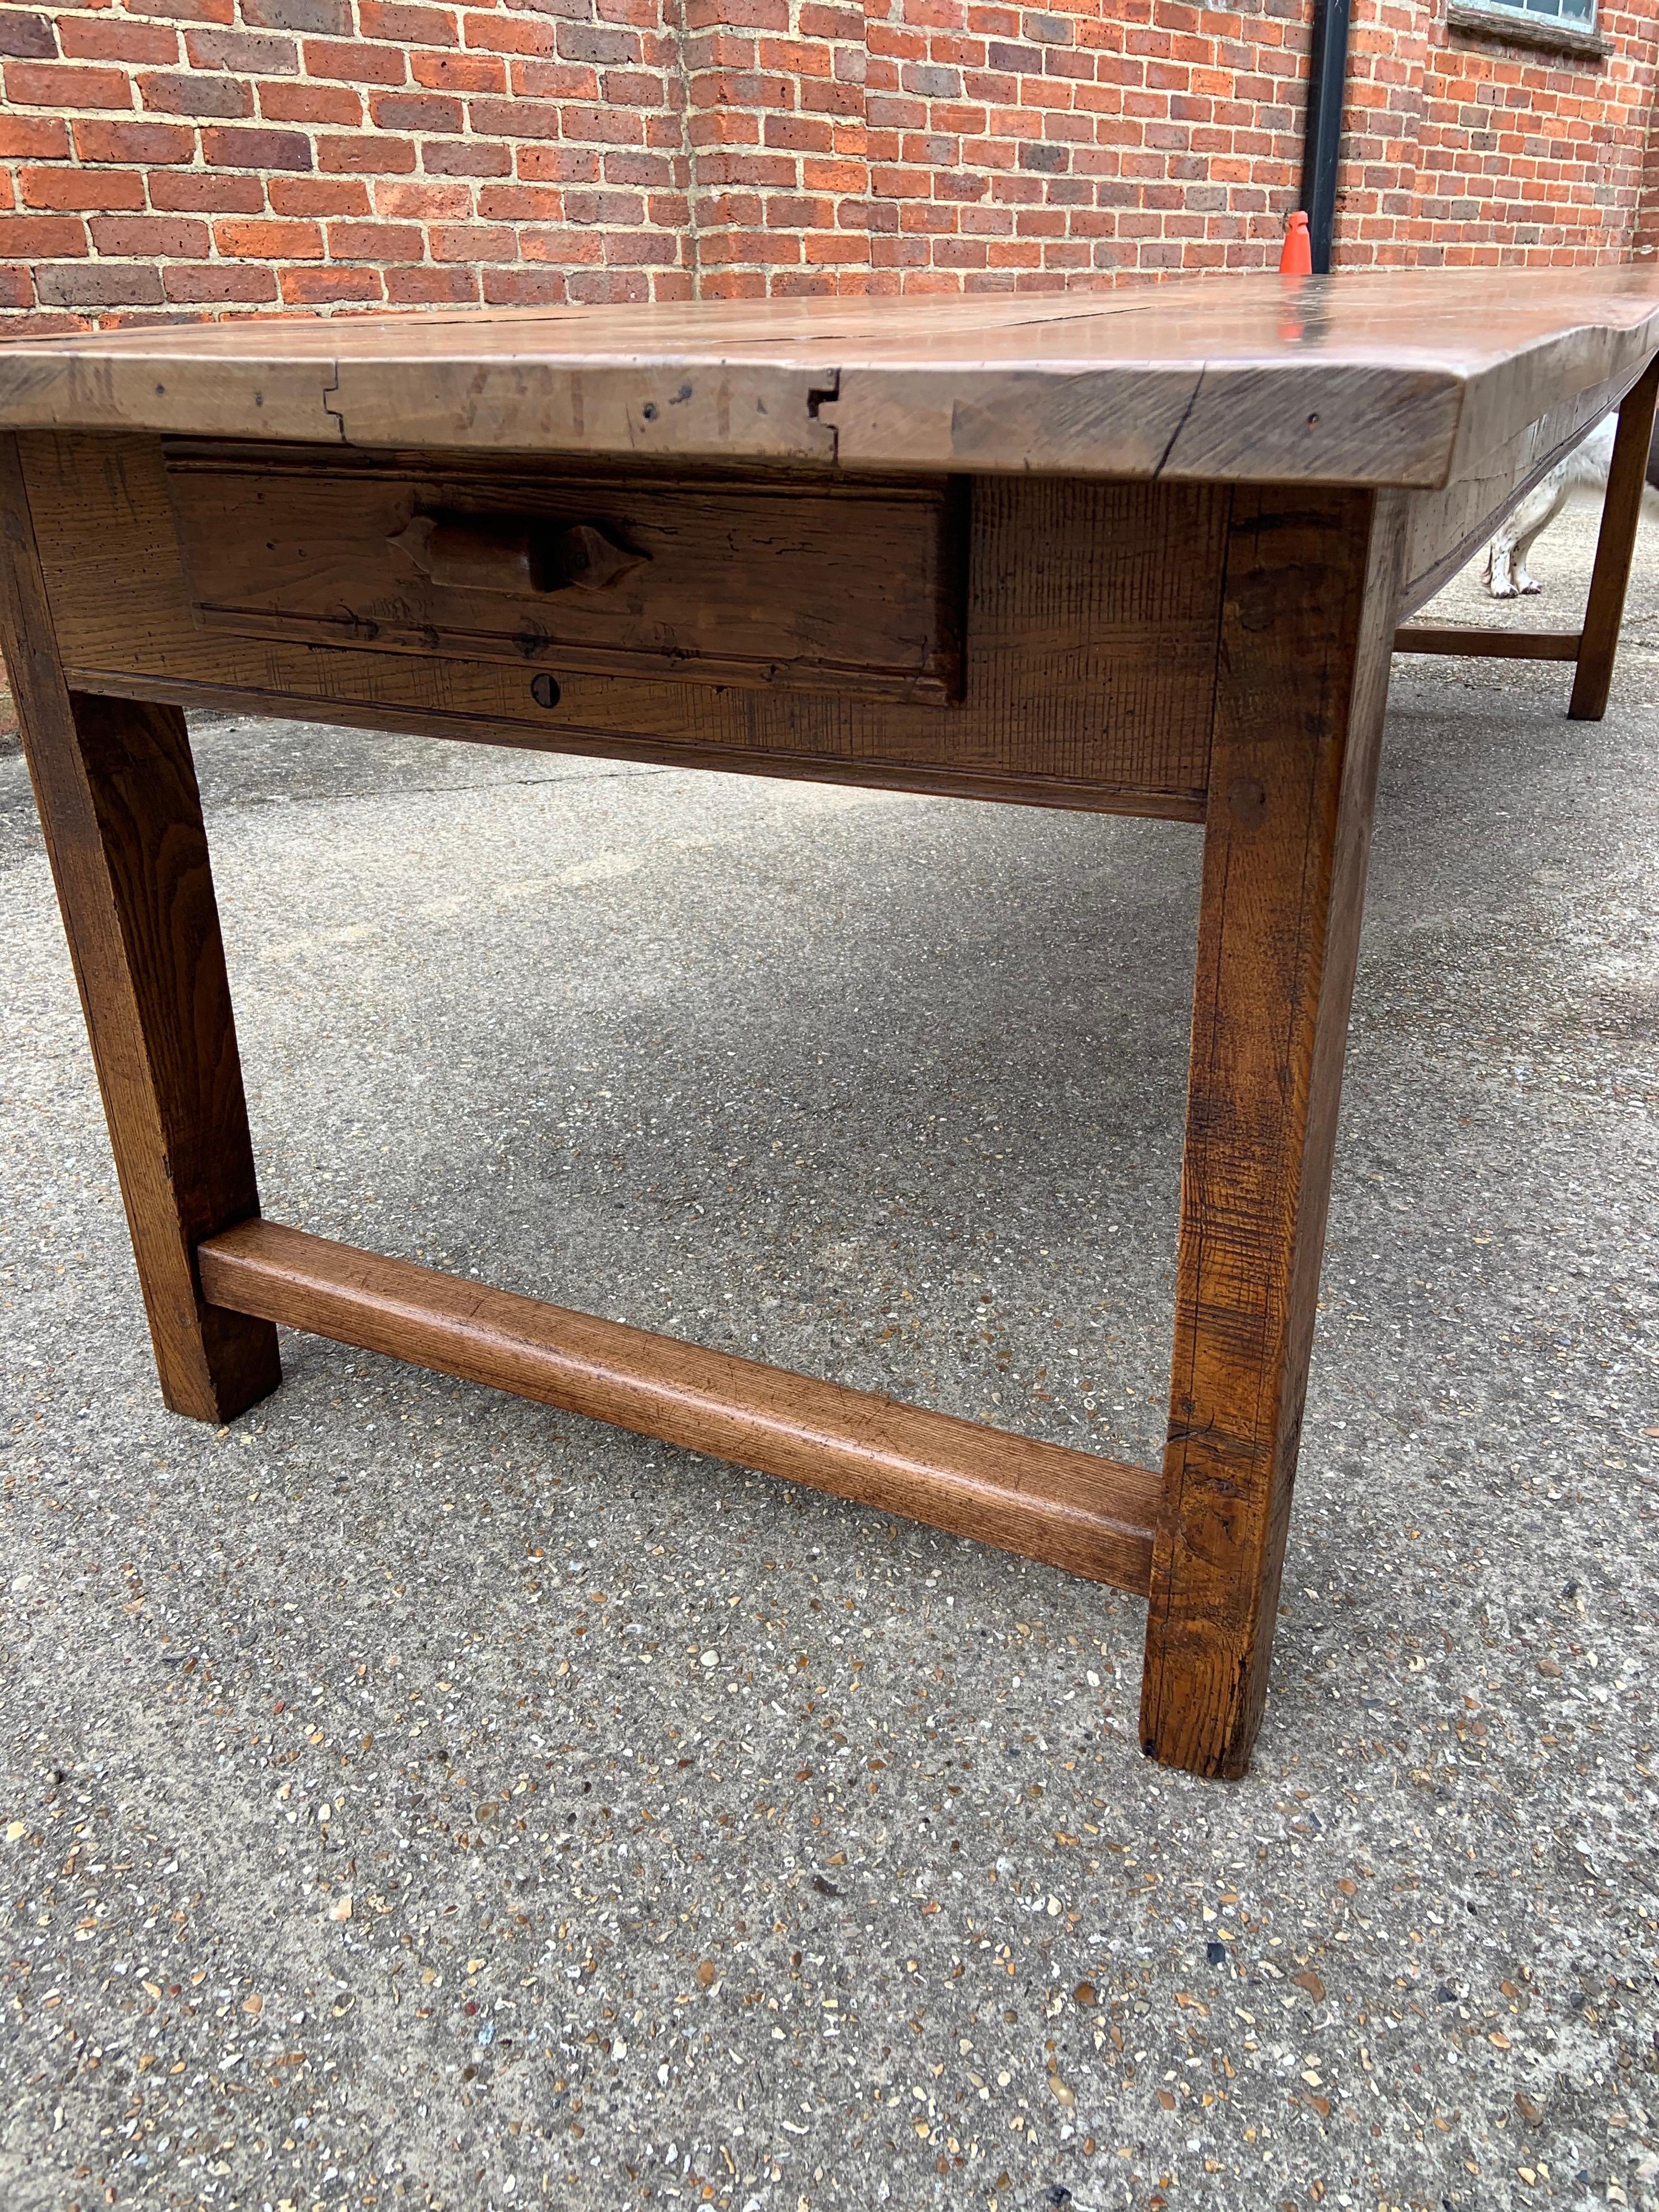 19th Century Large Rustic Pale Beech Farmhouse Table